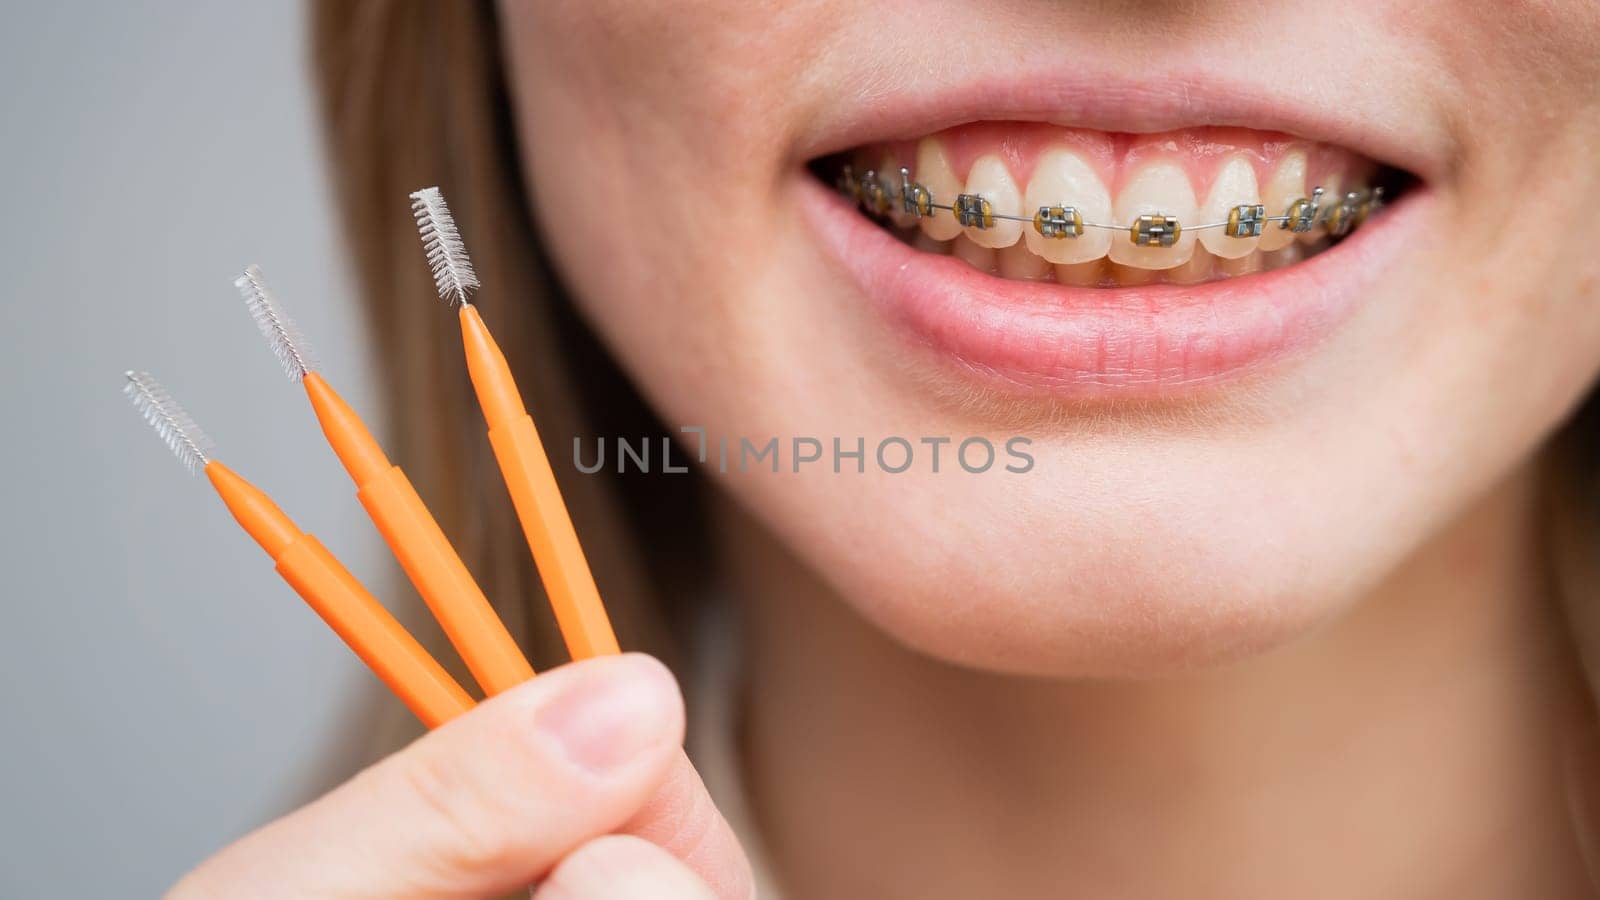 Close-up portrait of a woman with braces holding a floss to clean her teeth